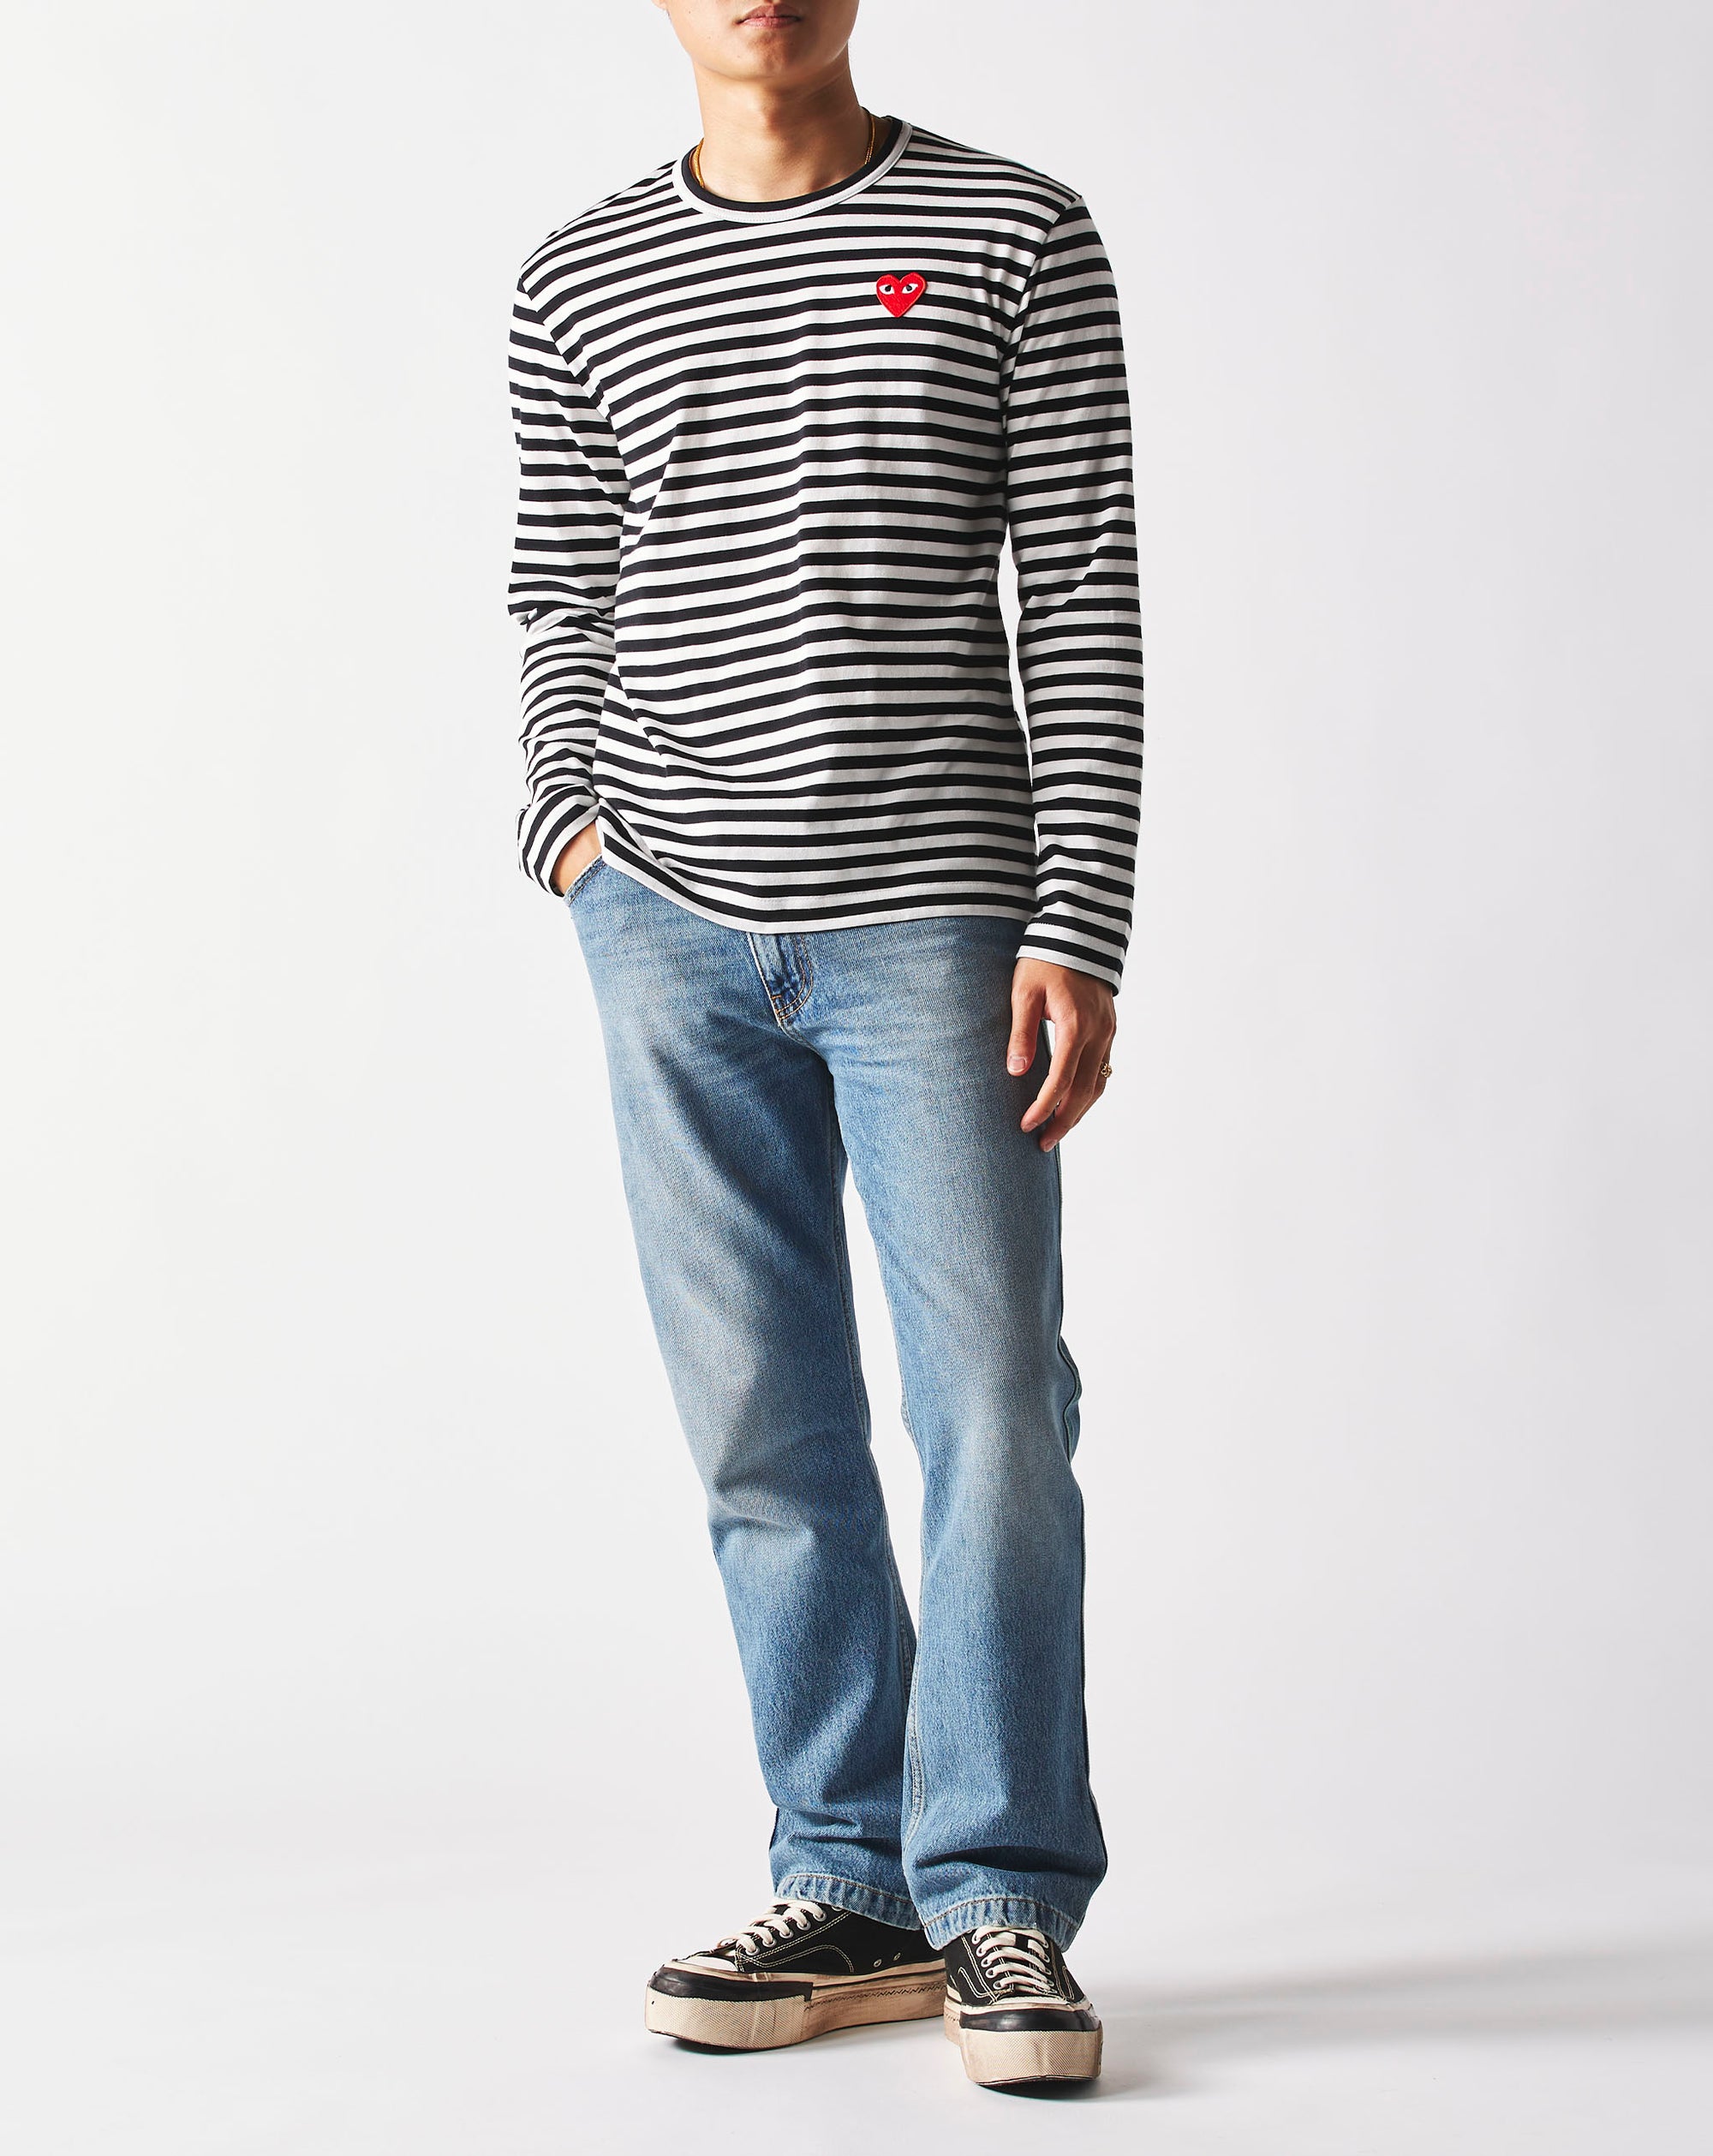 Comme des Garcons PLAY Striped Long Sleeve T-Shirt - Rule of Next Apparel